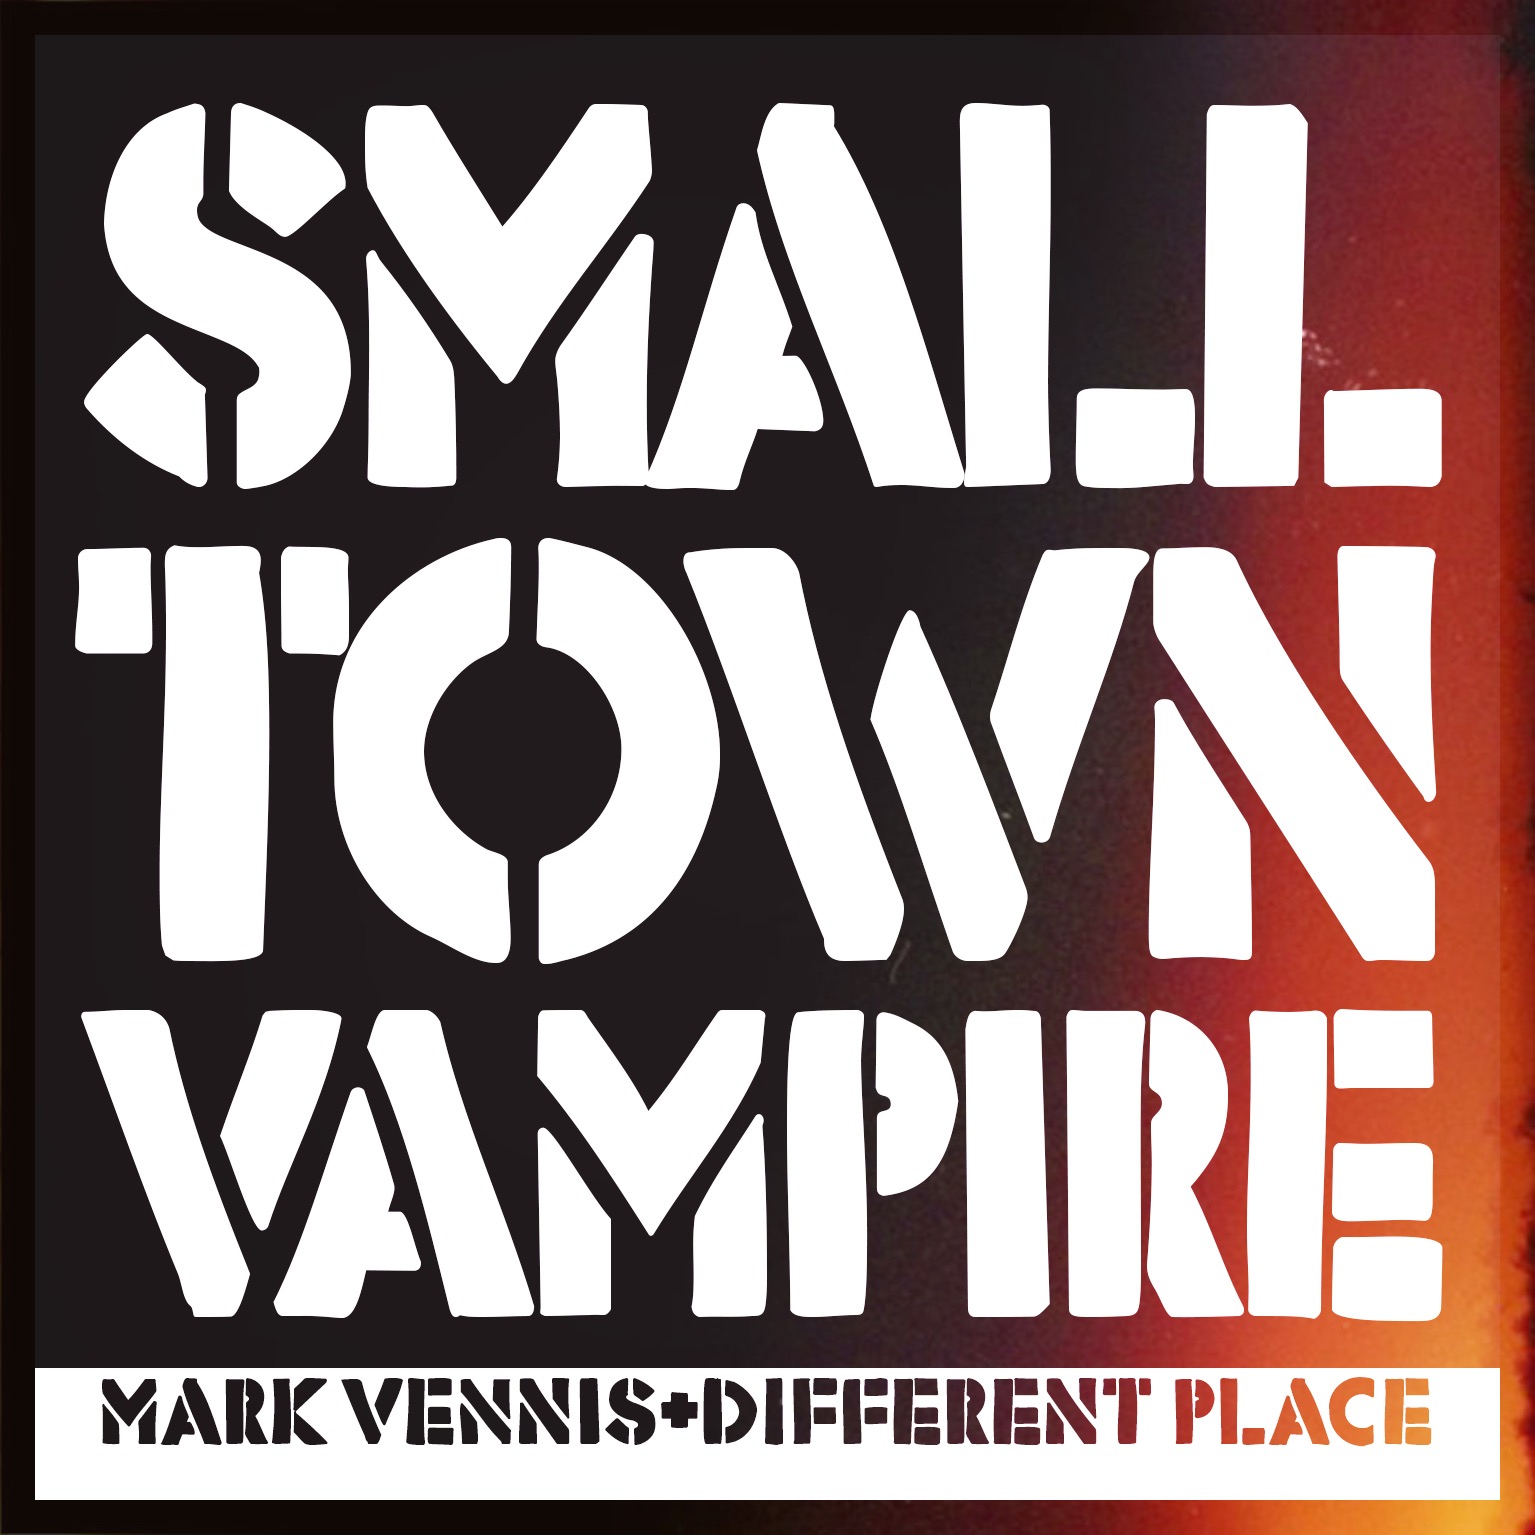 Mark Vennis & Different Place – “Small Town Vampire”